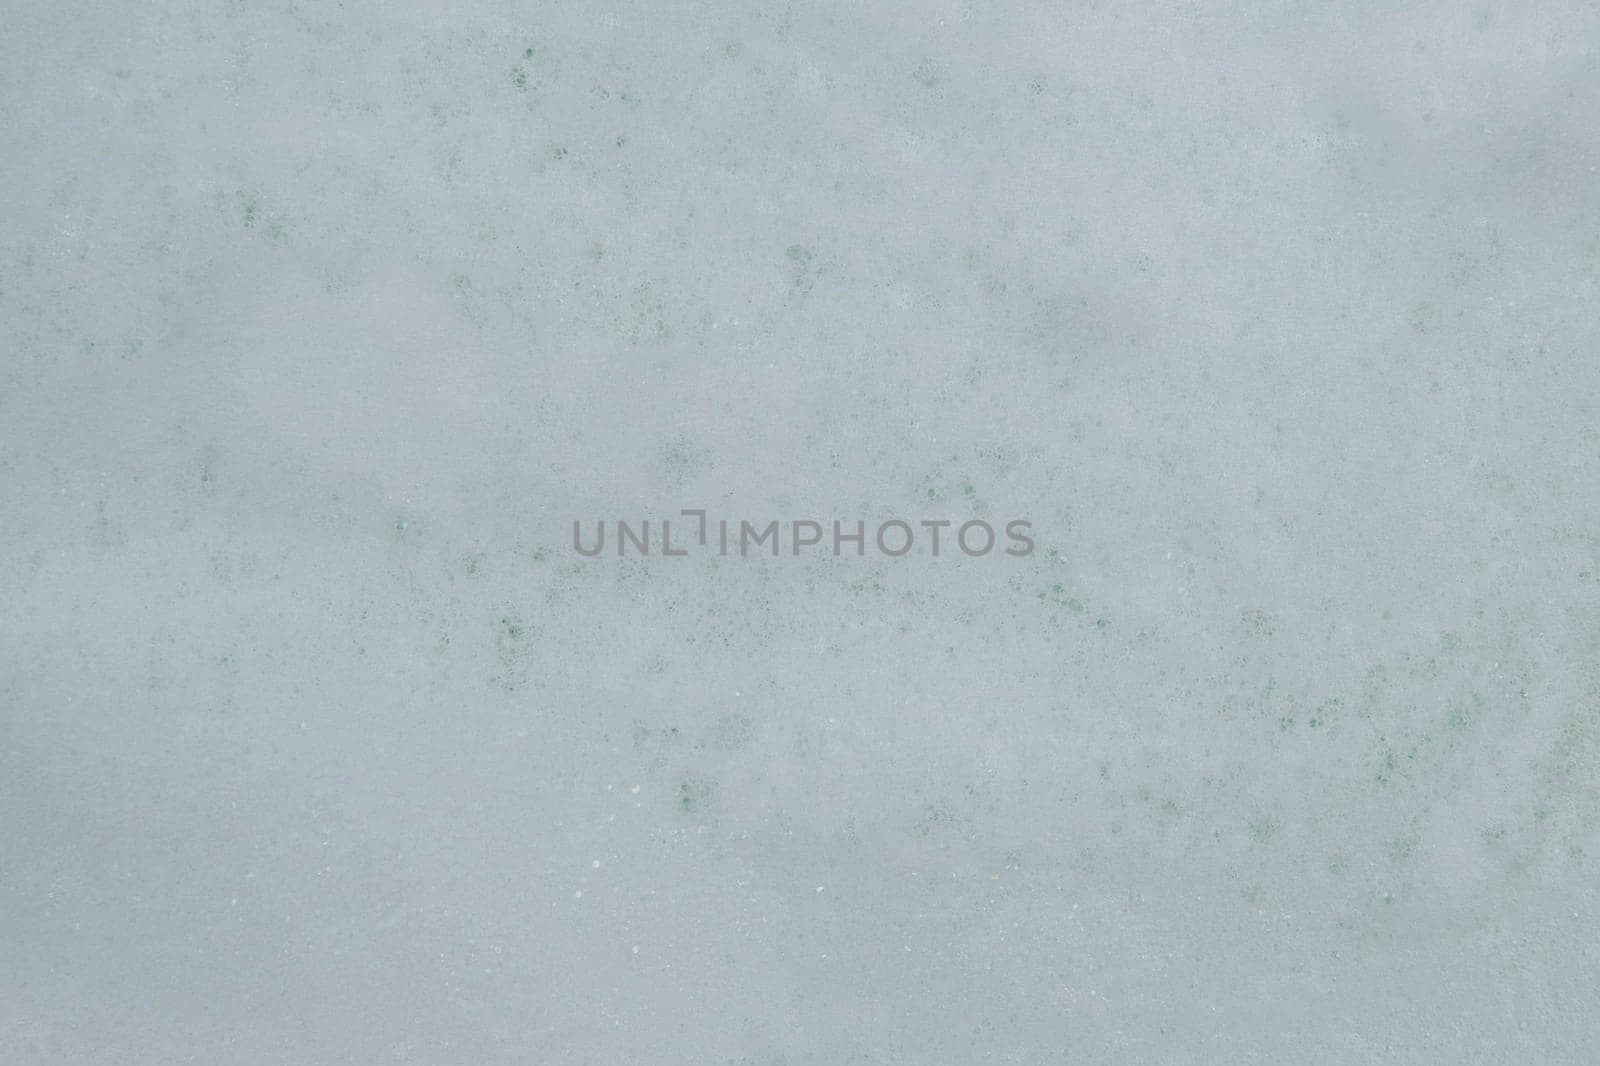 Texture of white soap foam with abstract soap bubbles background.